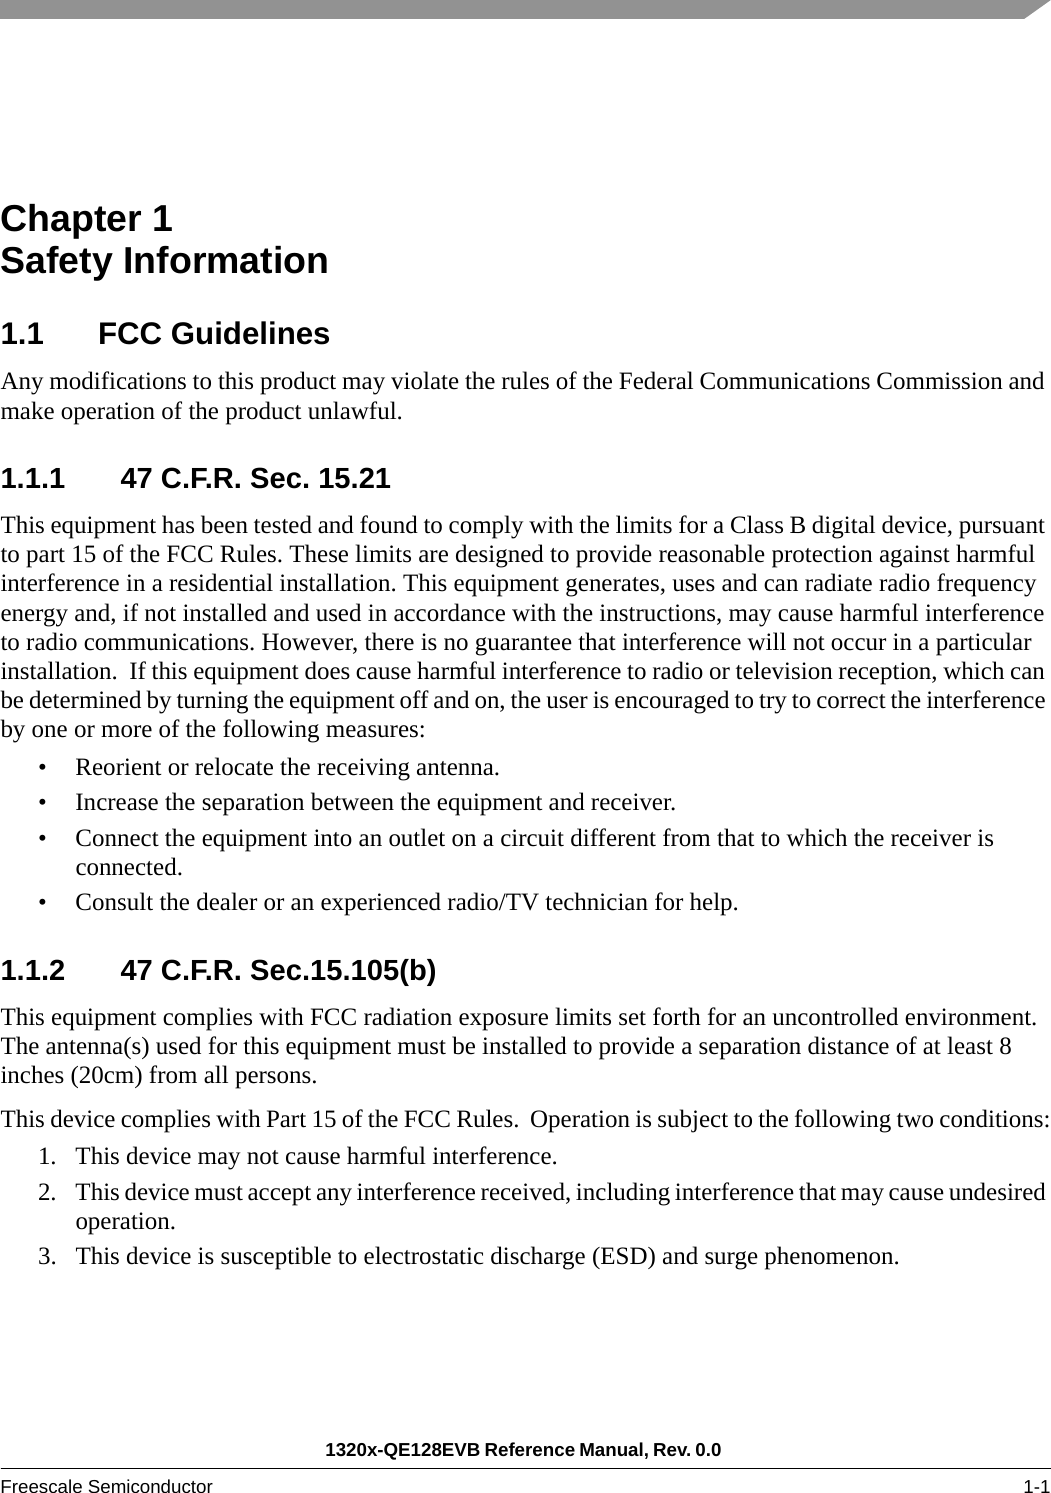 1320x-QE128EVB Reference Manual, Rev. 0.0 Freescale Semiconductor 1-1Chapter 1  Safety Information1.1 FCC GuidelinesAny modifications to this product may violate the rules of the Federal Communications Commission and make operation of the product unlawful.1.1.1 47 C.F.R. Sec. 15.21This equipment has been tested and found to comply with the limits for a Class B digital device, pursuant to part 15 of the FCC Rules. These limits are designed to provide reasonable protection against harmful interference in a residential installation. This equipment generates, uses and can radiate radio frequency energy and, if not installed and used in accordance with the instructions, may cause harmful interference to radio communications. However, there is no guarantee that interference will not occur in a particular installation.  If this equipment does cause harmful interference to radio or television reception, which can be determined by turning the equipment off and on, the user is encouraged to try to correct the interference by one or more of the following measures:• Reorient or relocate the receiving antenna.• Increase the separation between the equipment and receiver.• Connect the equipment into an outlet on a circuit different from that to which the receiver is connected.• Consult the dealer or an experienced radio/TV technician for help.1.1.2 47 C.F.R. Sec.15.105(b)This equipment complies with FCC radiation exposure limits set forth for an uncontrolled environment. The antenna(s) used for this equipment must be installed to provide a separation distance of at least 8 inches (20cm) from all persons.This device complies with Part 15 of the FCC Rules.  Operation is subject to the following two conditions:1. This device may not cause harmful interference.2. This device must accept any interference received, including interference that may cause undesired operation.3. This device is susceptible to electrostatic discharge (ESD) and surge phenomenon. 